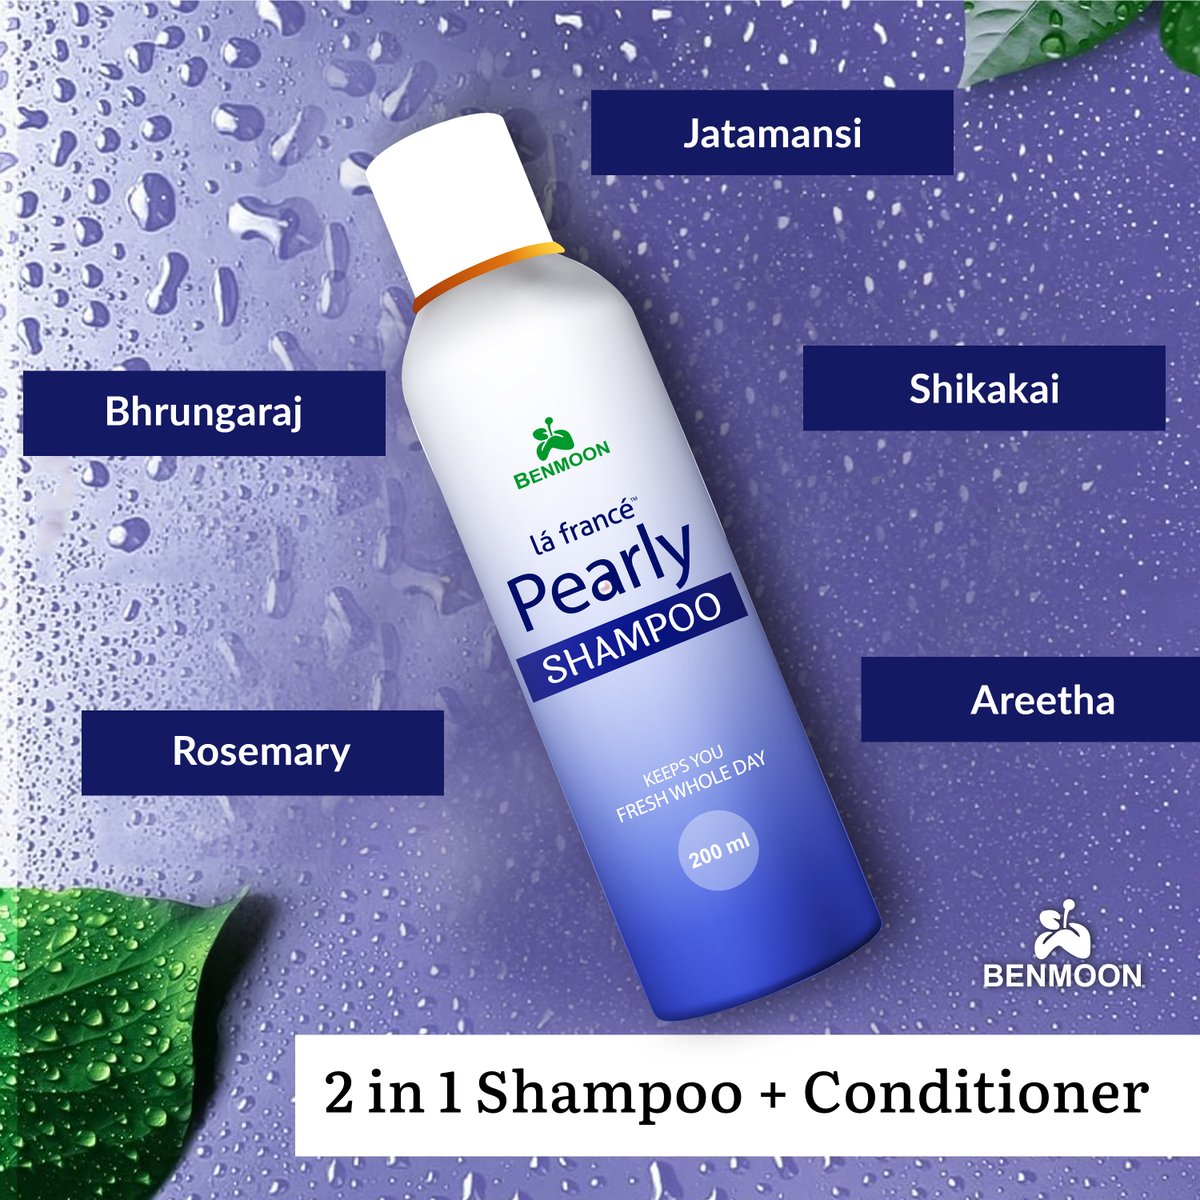 PURITY DETERMINES OUR QUALITY
#ayurvedalifestyle #ayurvedaproducts
#benmoonproduct #benmoonpearlyshampoo
'GOOD HEALTH STARTS WITH BENMOON'
HEALTH IS IMPORTANT FOR ALL.